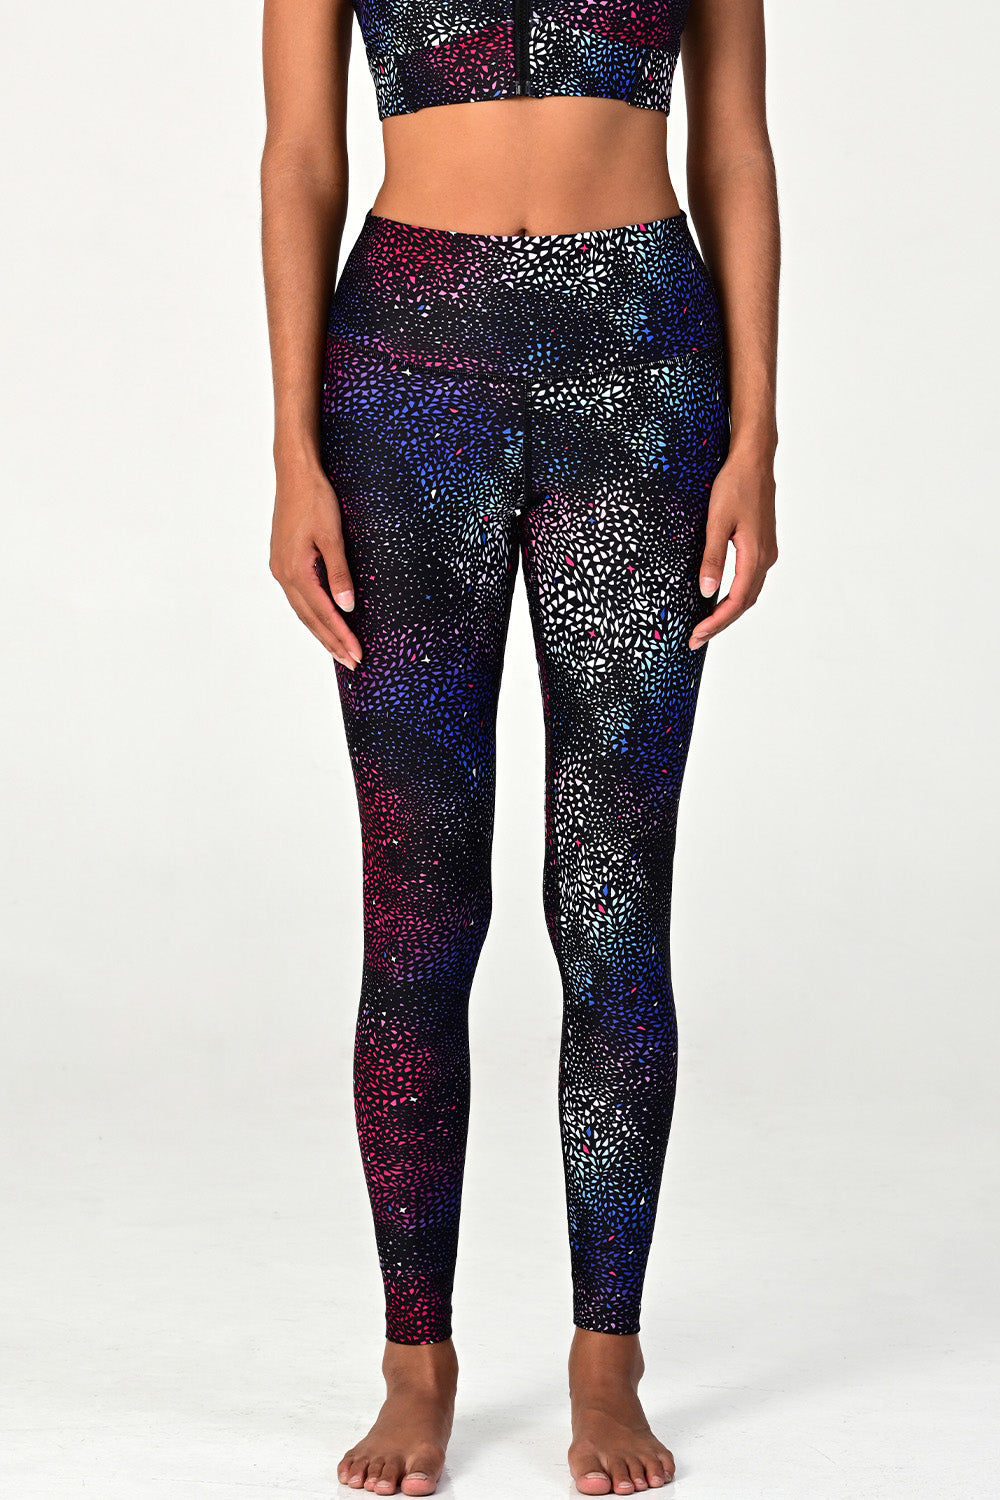 Woman wearing the Soho Galaxy active legging on white background front view. 